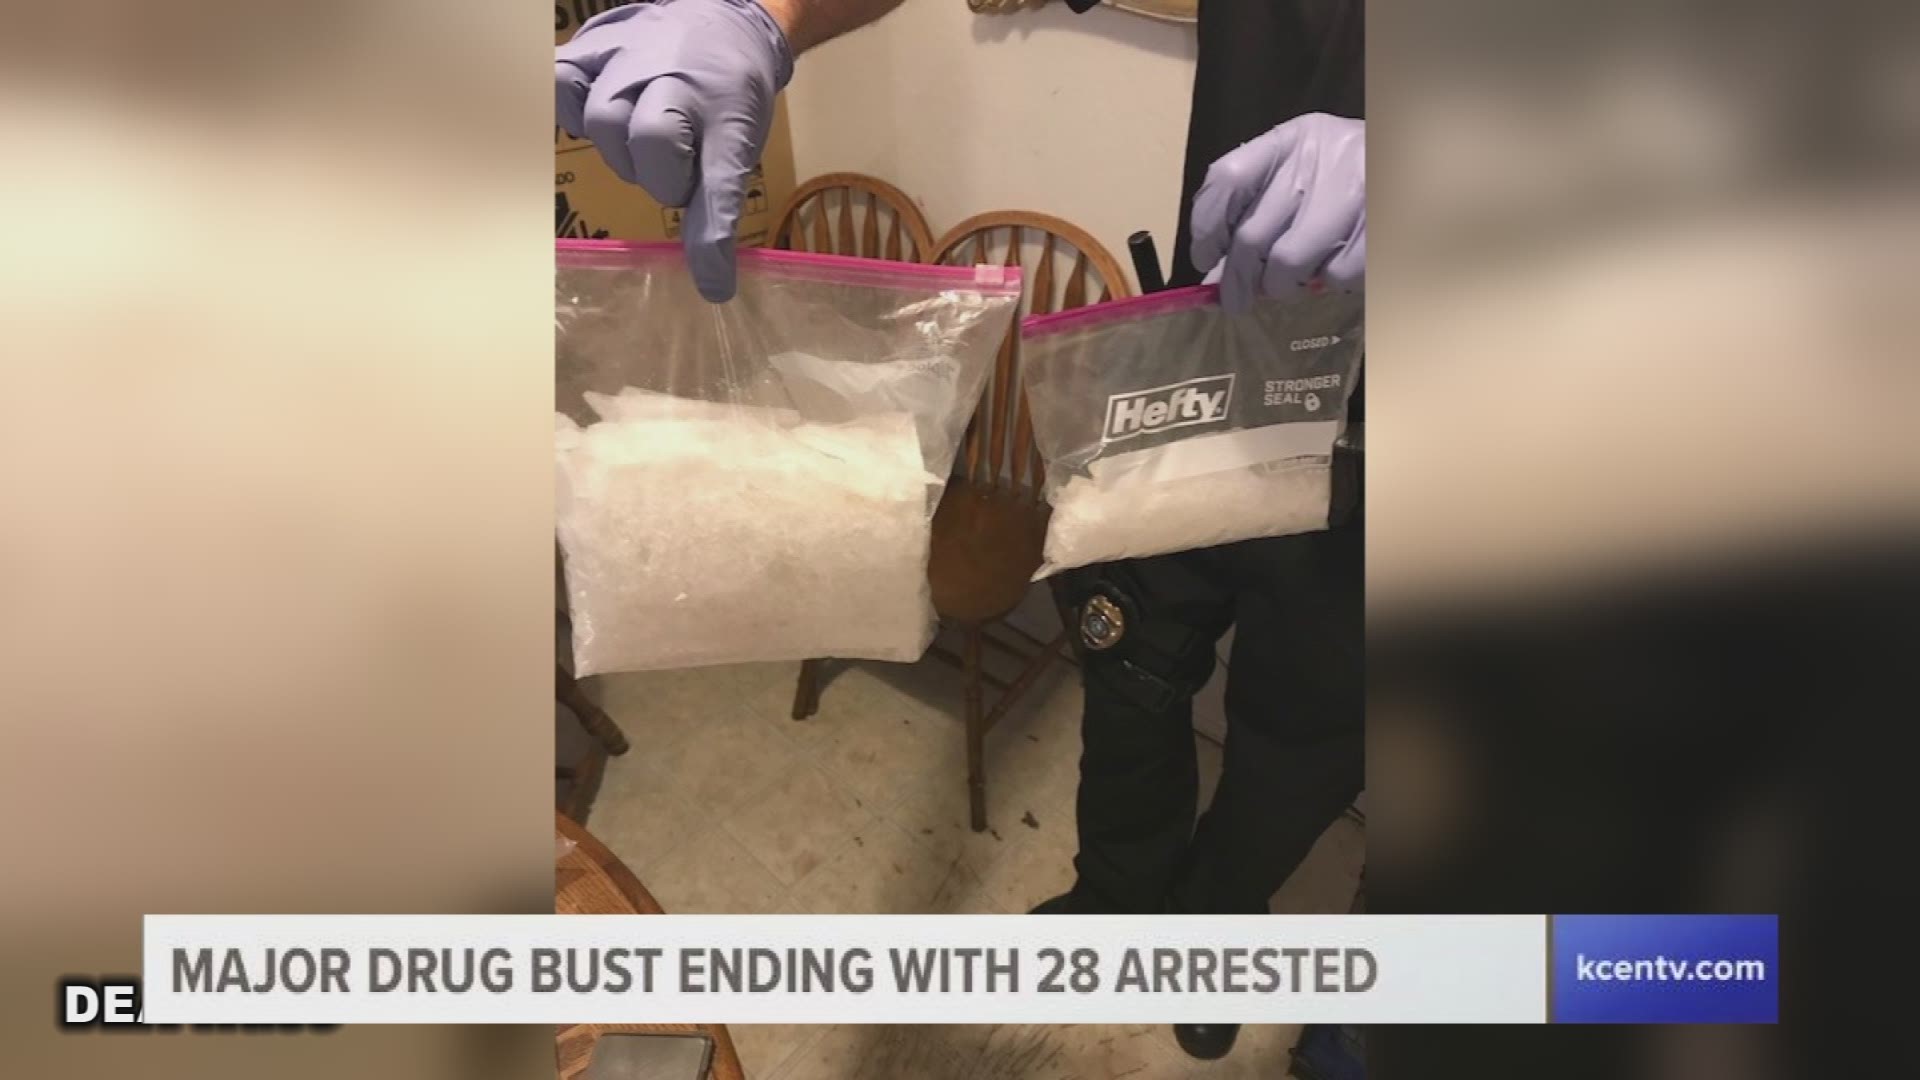 More than 5 pounds of Meth taken off the streets in Central Texas